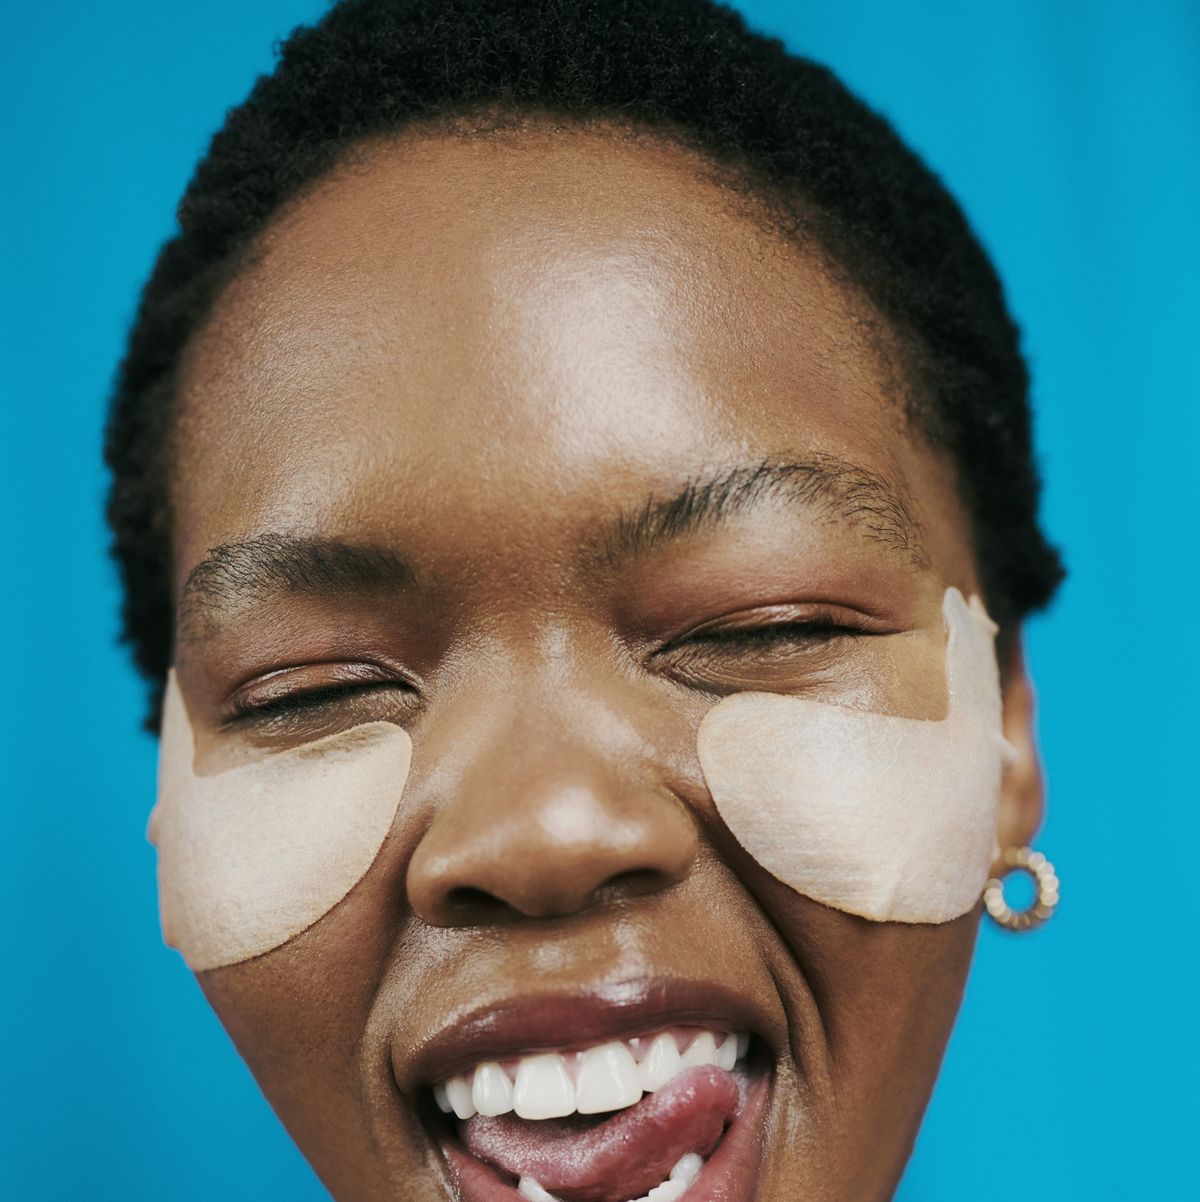 10 highly-rated under eye patches for puffiness, wrinkles and self